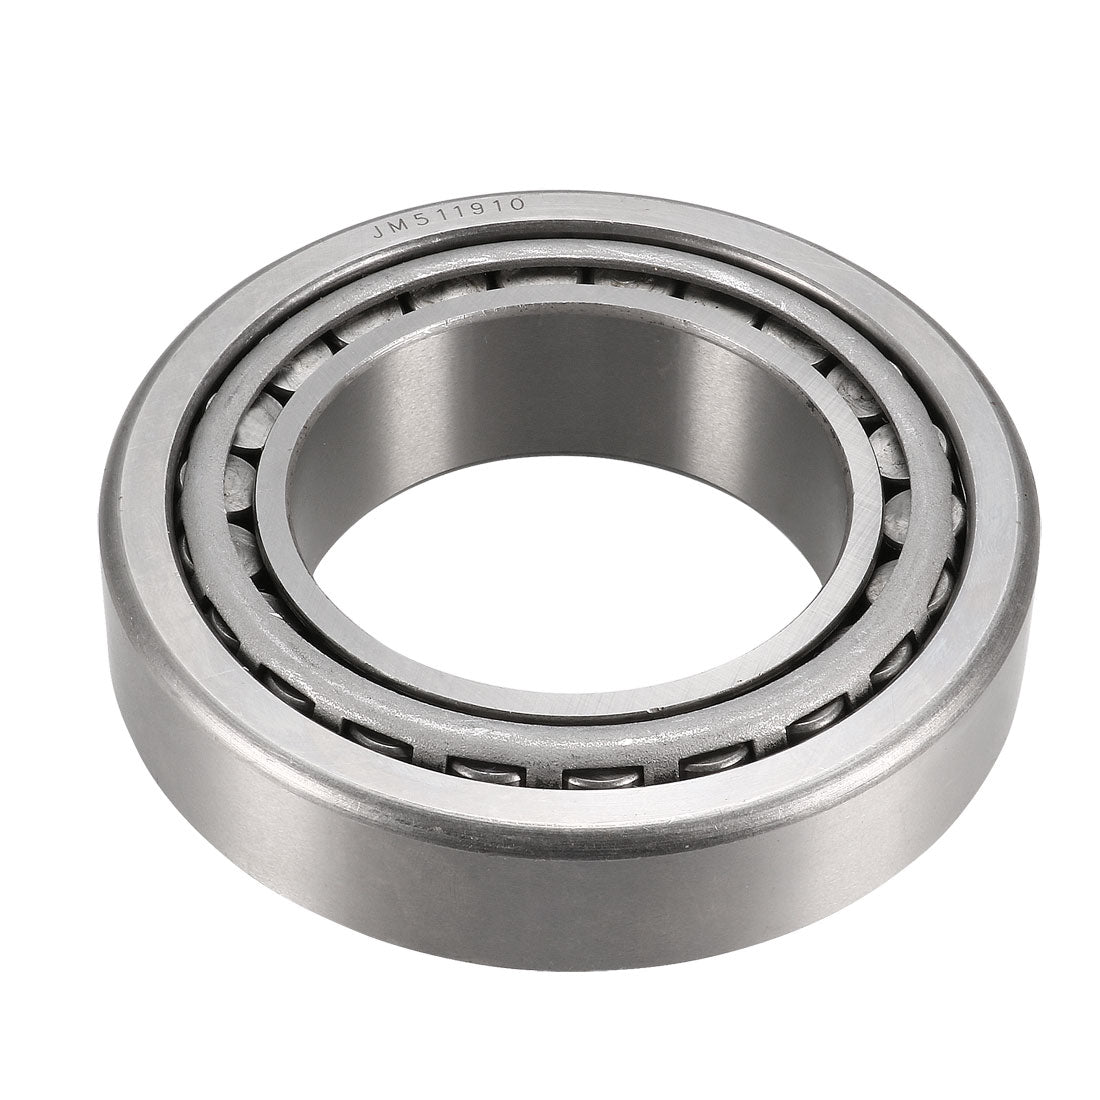 uxcell Uxcell JM511946/JM511910 Tapered Roller Bearing Cone and Cup Set 65mm Bore 110mm O.D.